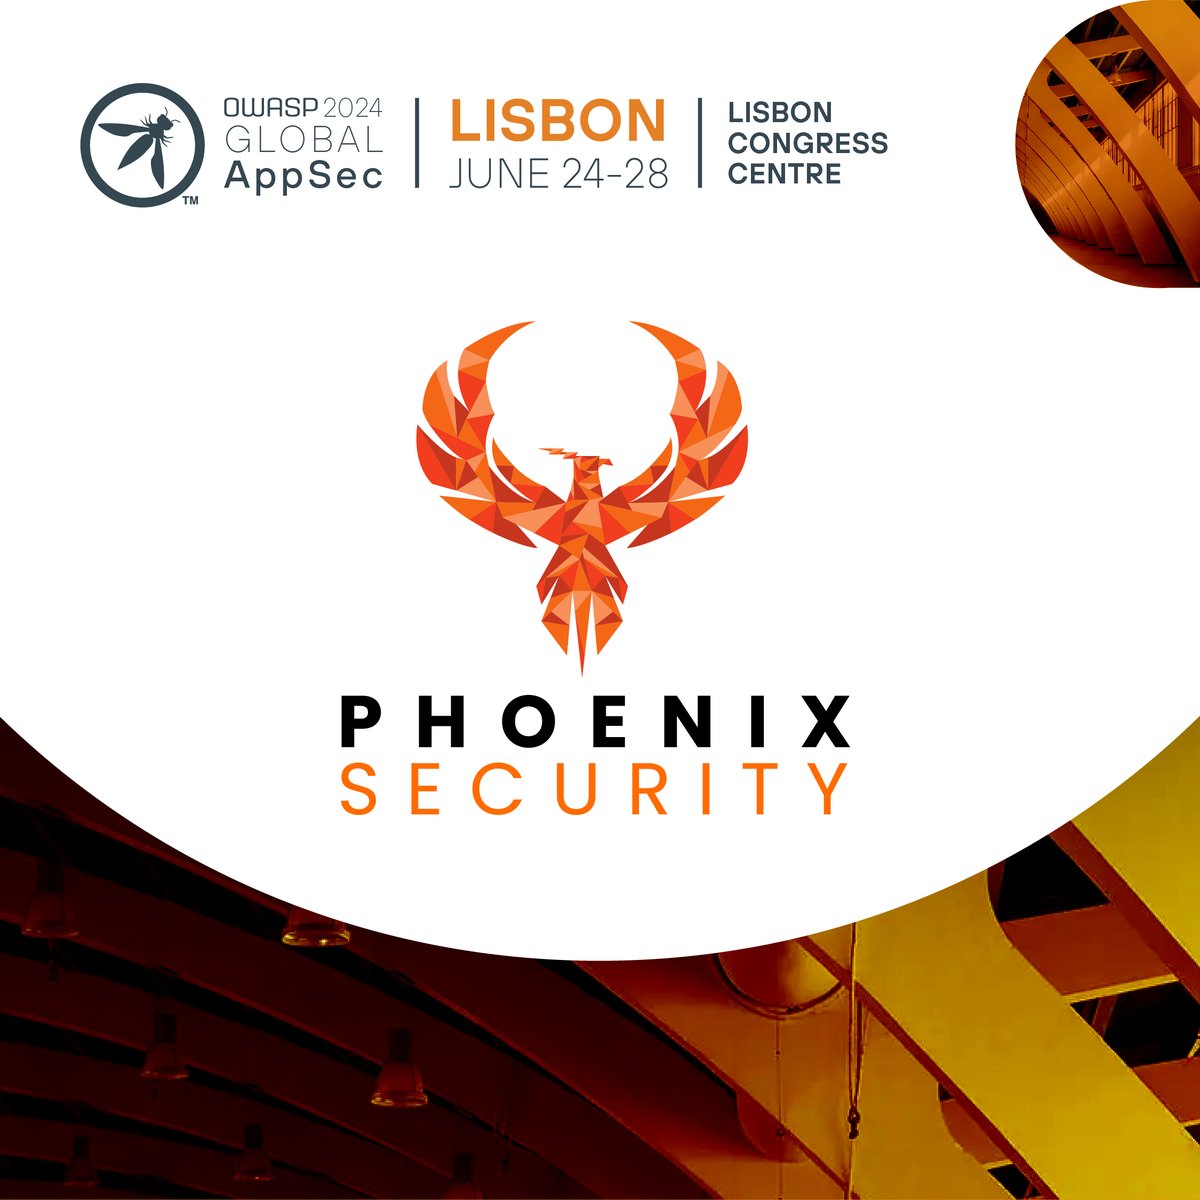 Thank you to @sec_phoenix for being a sponsor for OWASP Global AppSec 2024 Lisbon This event will feature trainings designed by industry experts for appsec professionals. Register ⬇️ ecs.page.link/8R8JH #owasp #appsec #cybersecurity #lisbon #portugal